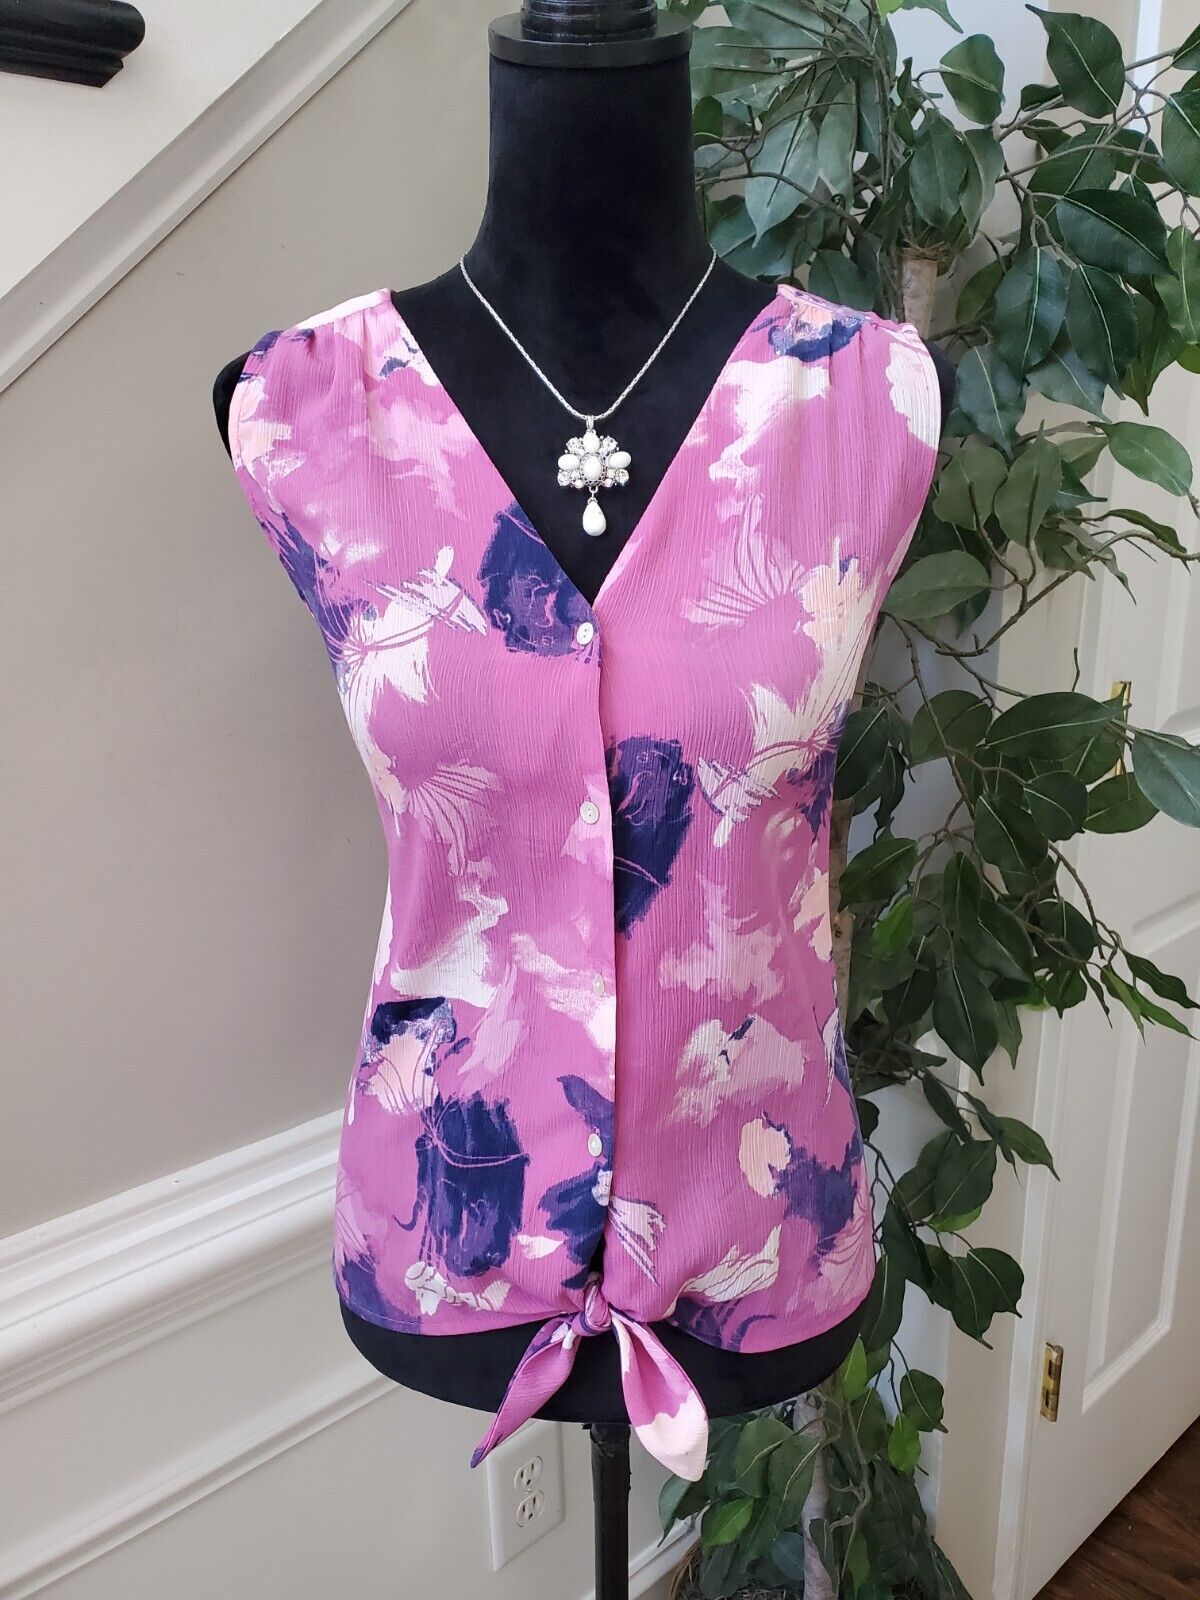 Primary image for Nine West Women's Pink Floral Sleeveless V Neck Button Front Top Blouse Size M